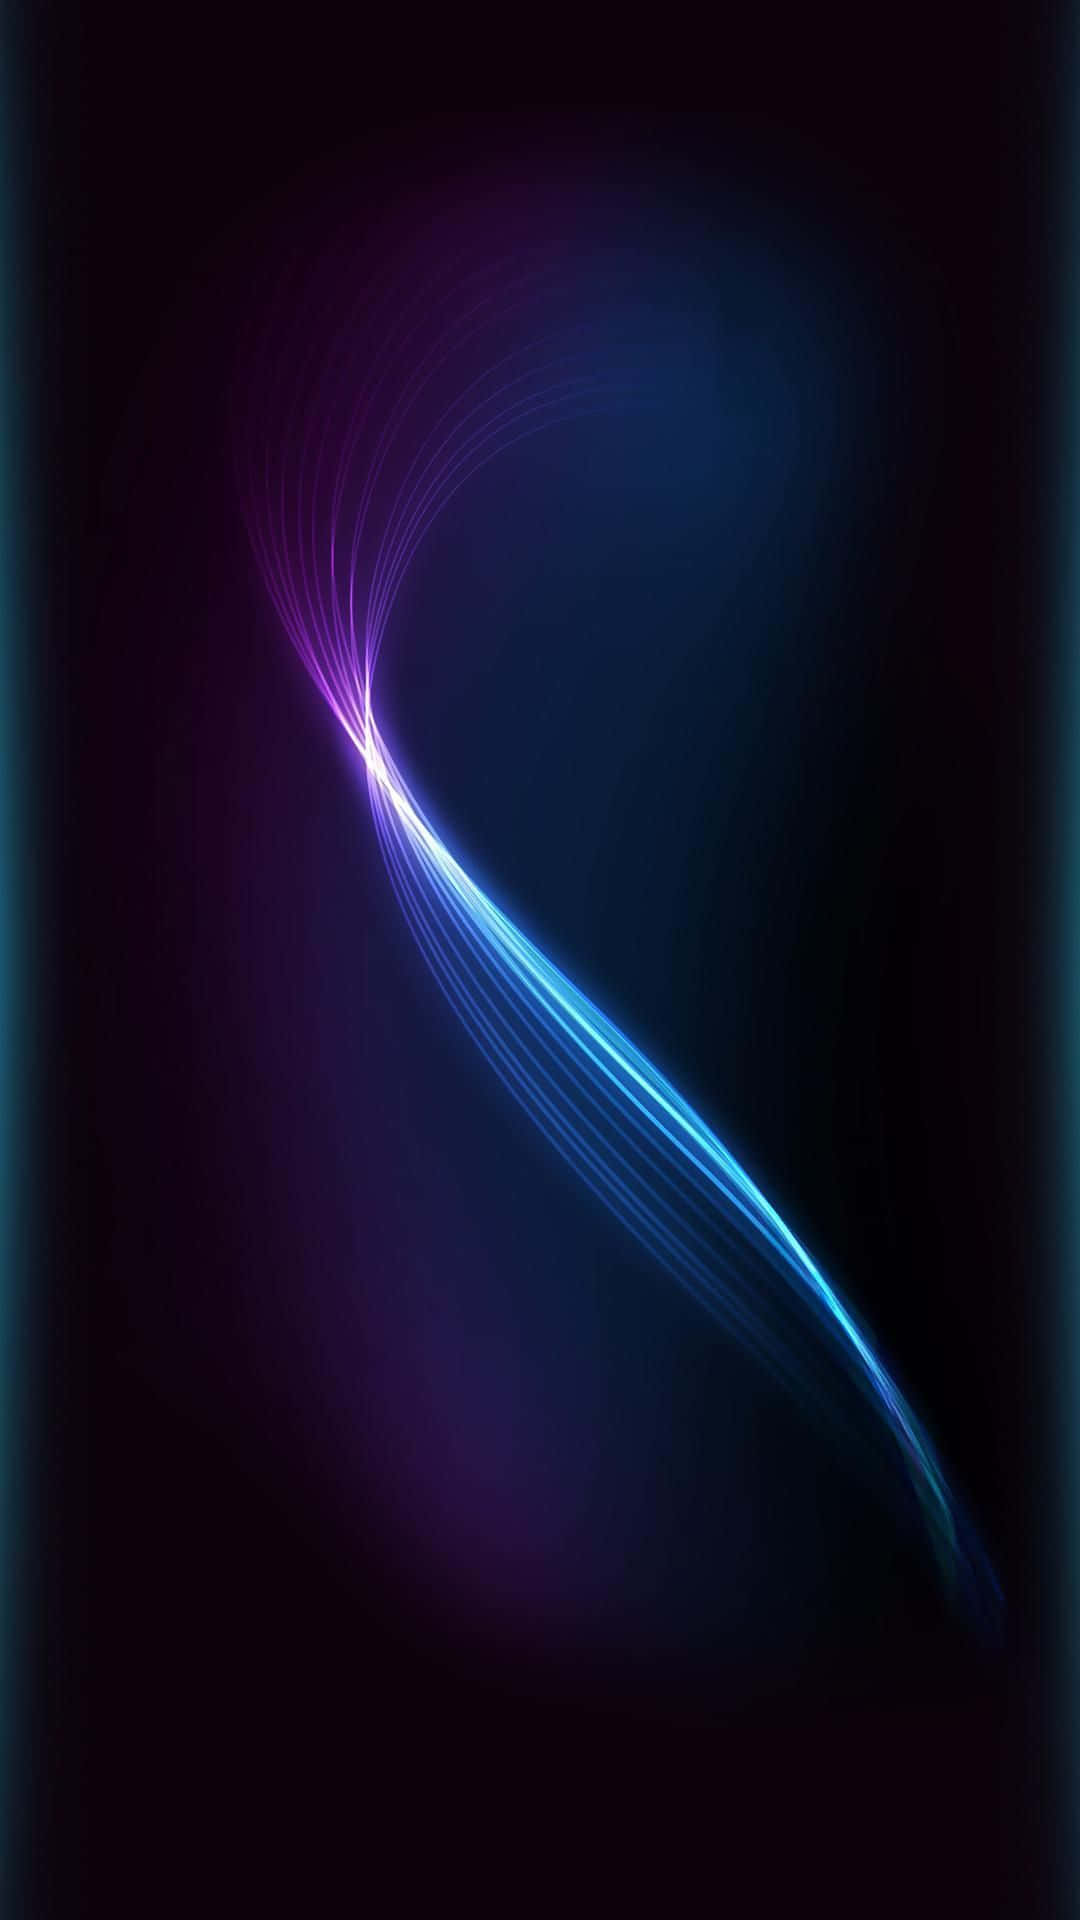 "The Future of Display Technology: Samsung AMOLED" Wallpaper